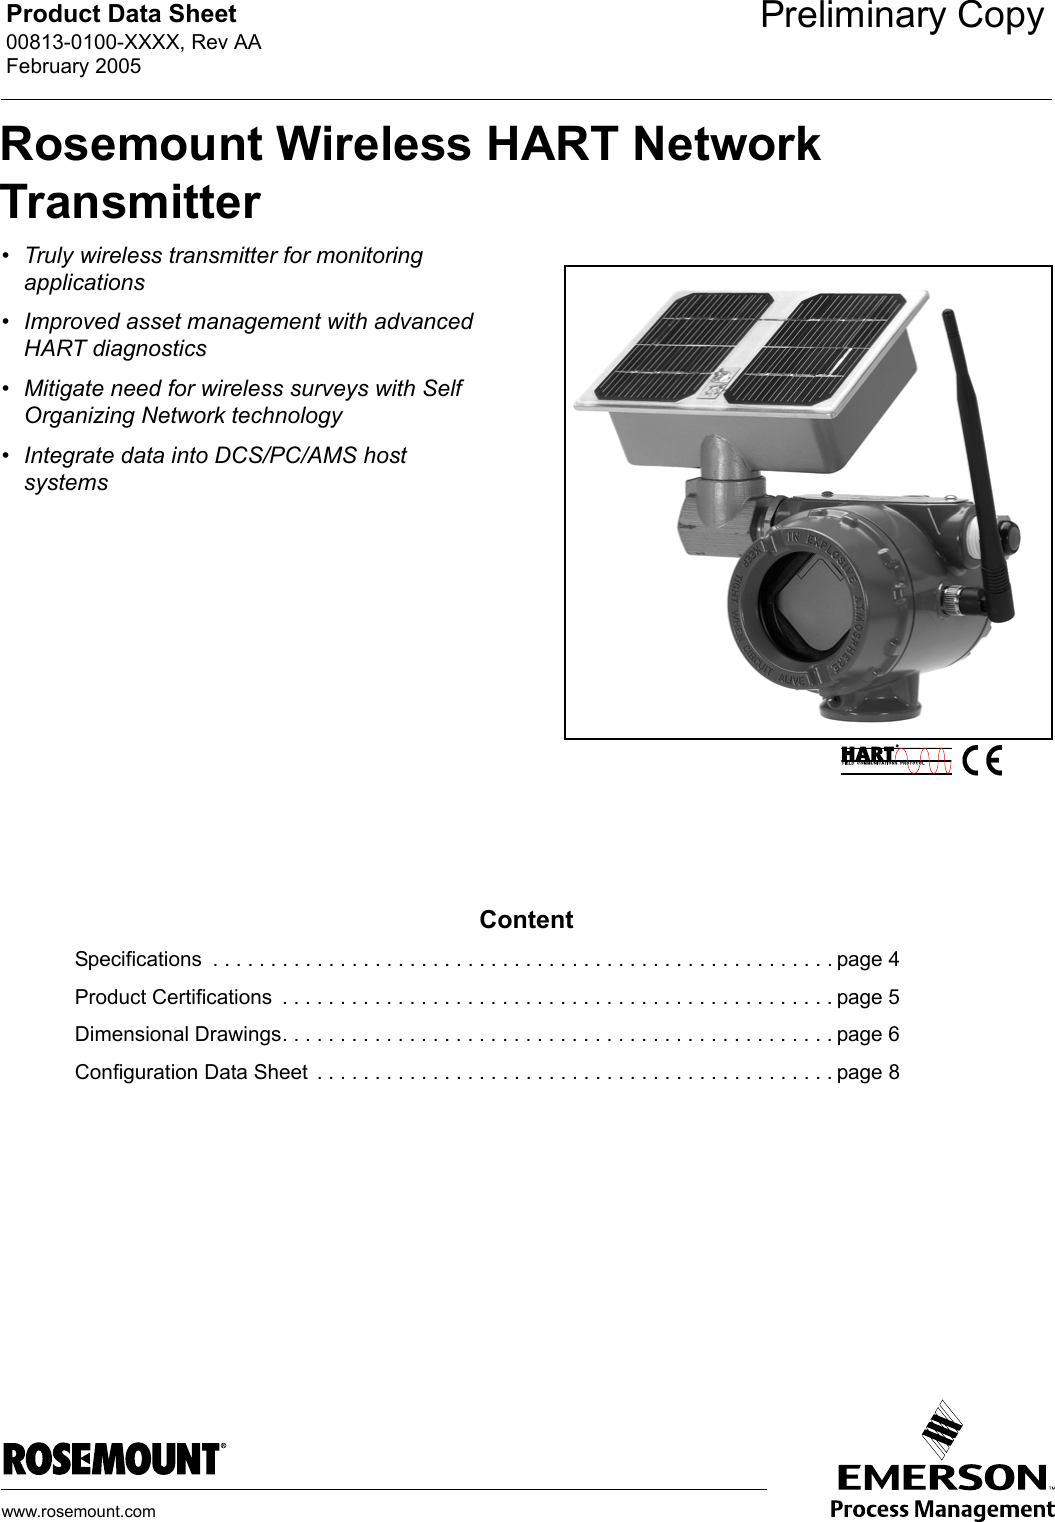 Product Data Sheet00813-0100-XXXX, Rev AAFebruary 2005www.rosemount.com• Truly wireless transmitter for monitoring applications• Improved asset management with advanced HART diagnostics• Mitigate need for wireless surveys with Self Organizing Network technology• Integrate data into DCS/PC/AMS host systemsContentSpecifications  . . . . . . . . . . . . . . . . . . . . . . . . . . . . . . . . . . . . . . . . . . . . . . . . . . . . . . page 4Product Certifications  . . . . . . . . . . . . . . . . . . . . . . . . . . . . . . . . . . . . . . . . . . . . . . . . page 5Dimensional Drawings. . . . . . . . . . . . . . . . . . . . . . . . . . . . . . . . . . . . . . . . . . . . . . . . page 6Configuration Data Sheet  . . . . . . . . . . . . . . . . . . . . . . . . . . . . . . . . . . . . . . . . . . . . . page 8Rosemount Wireless HART Network TransmitterPreliminary Copy